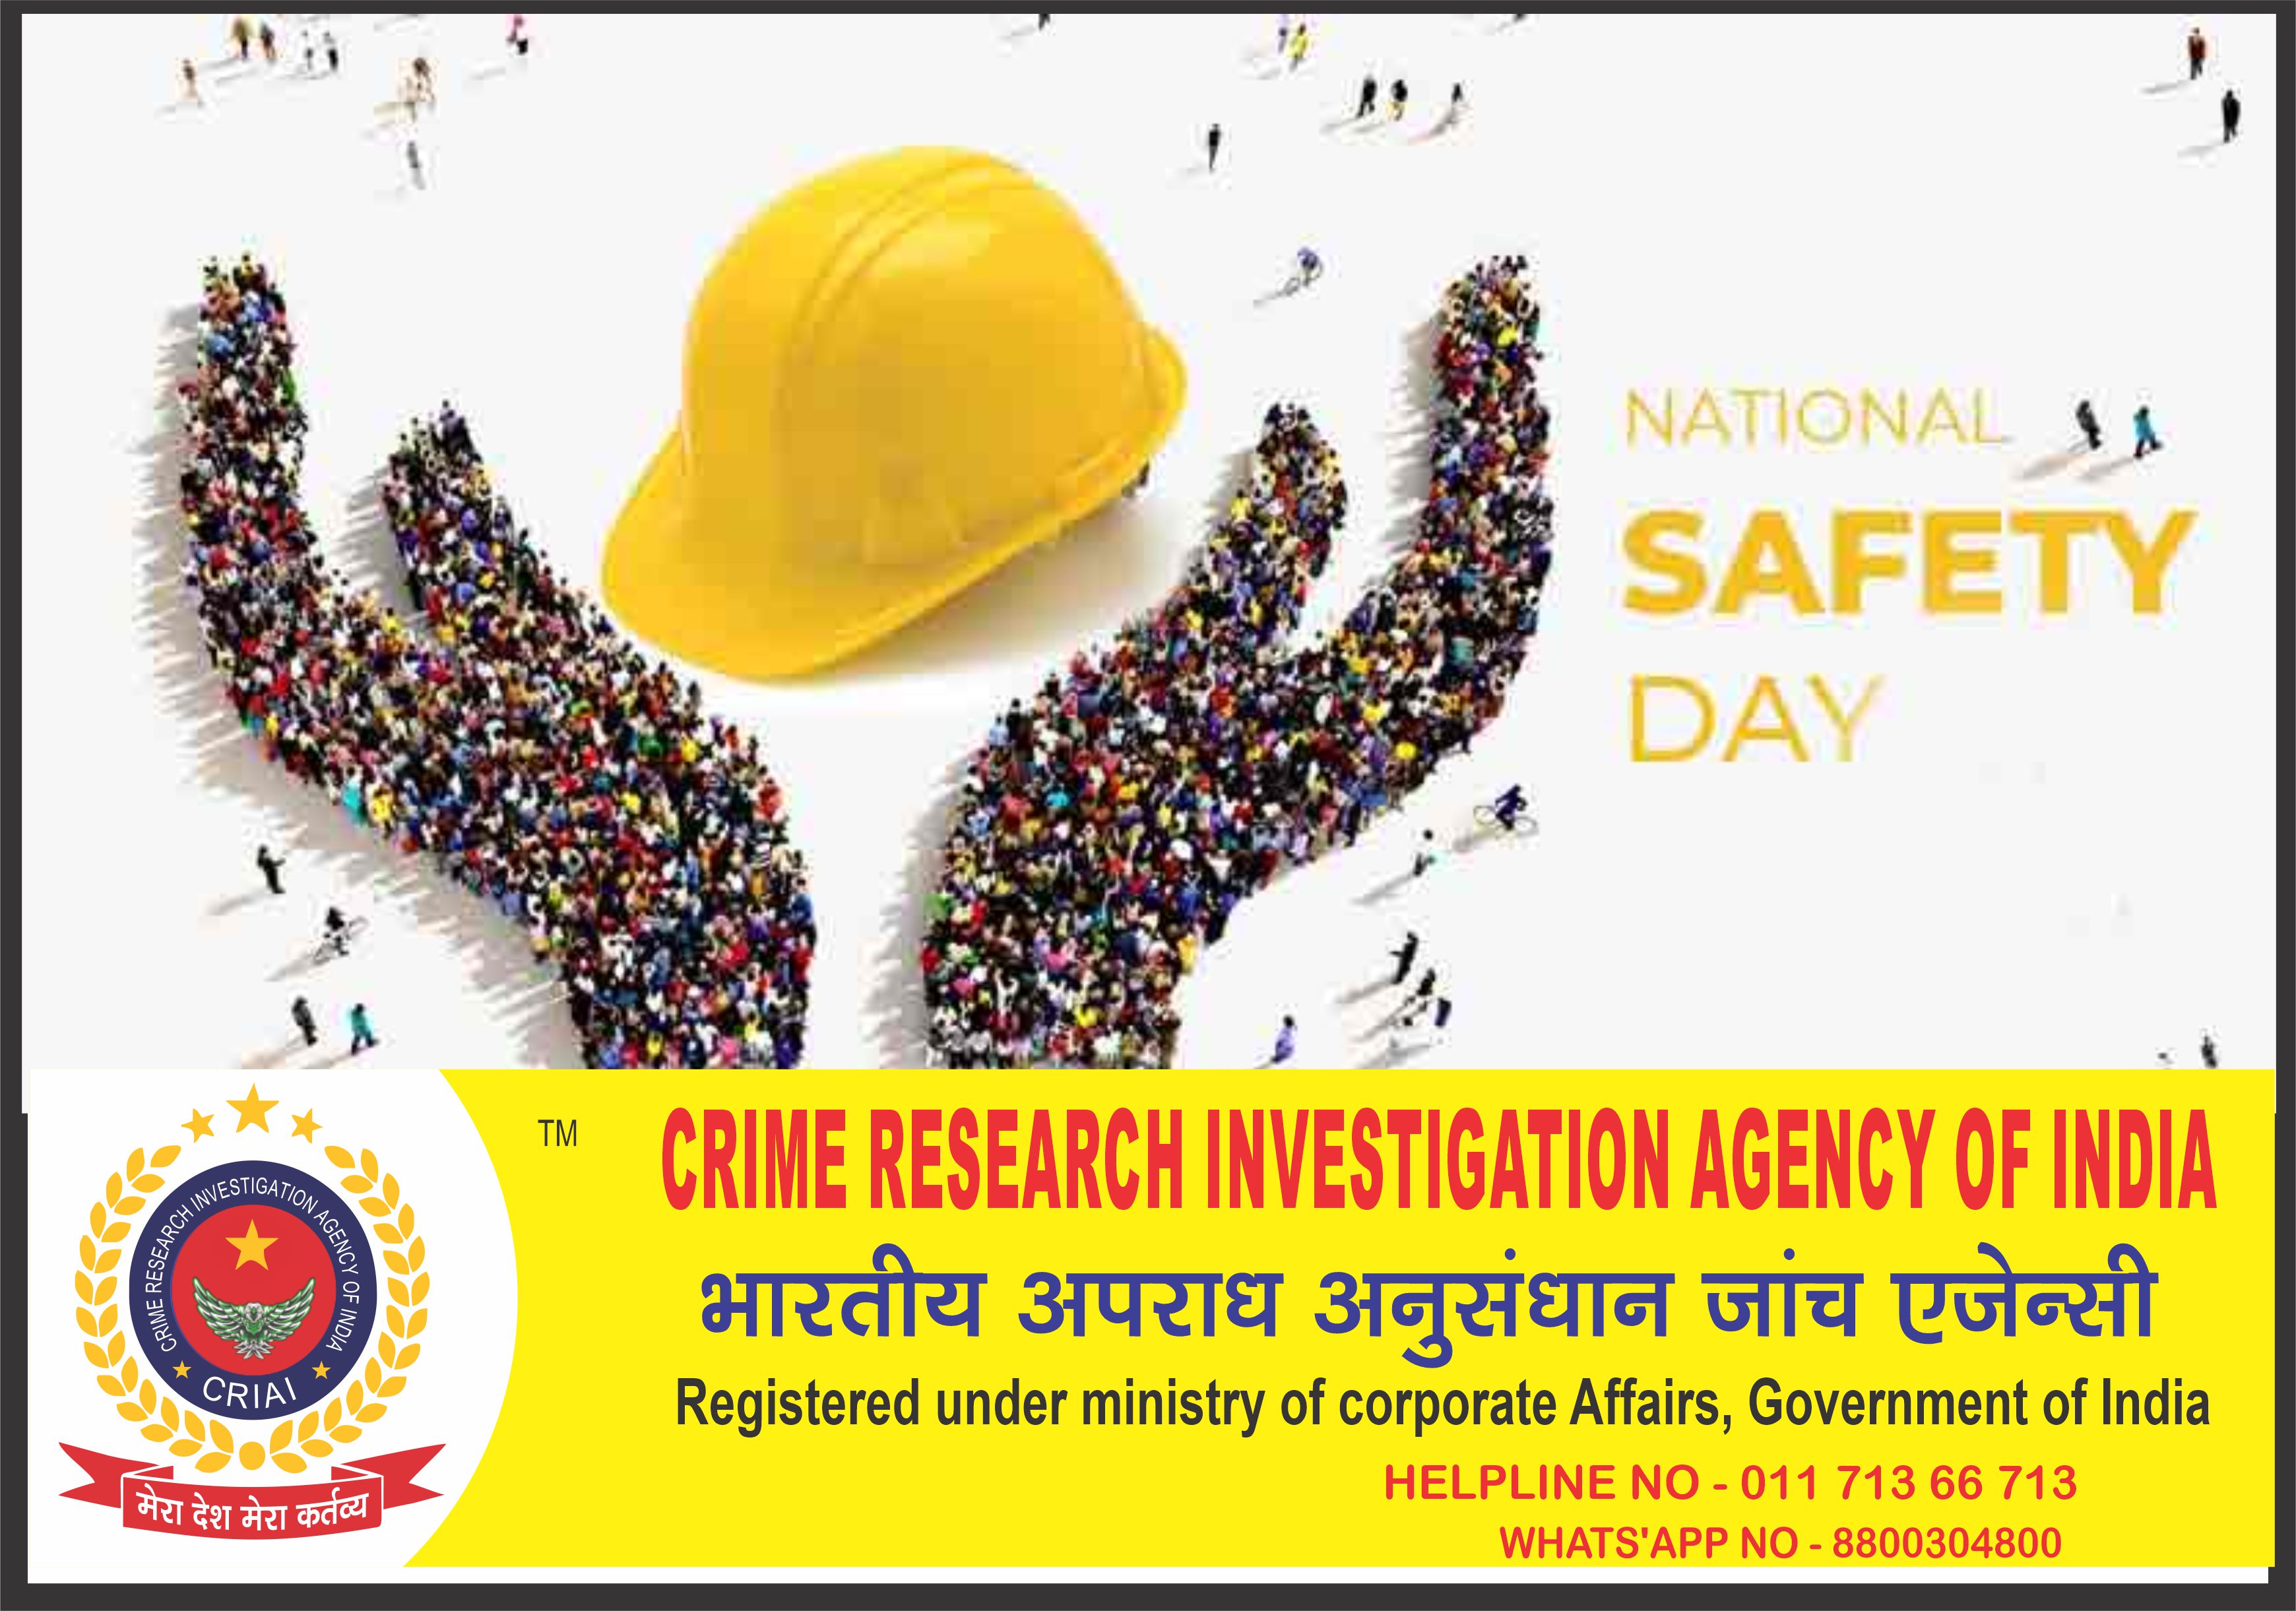 your-own-safety-late-accident-safe-today-safe-future-if-you-hurry-you-will-be-trouble-follow-rules-get-secure-future-sign-of-happy-future-be-alert-stay-safe-happy-national-safety-day